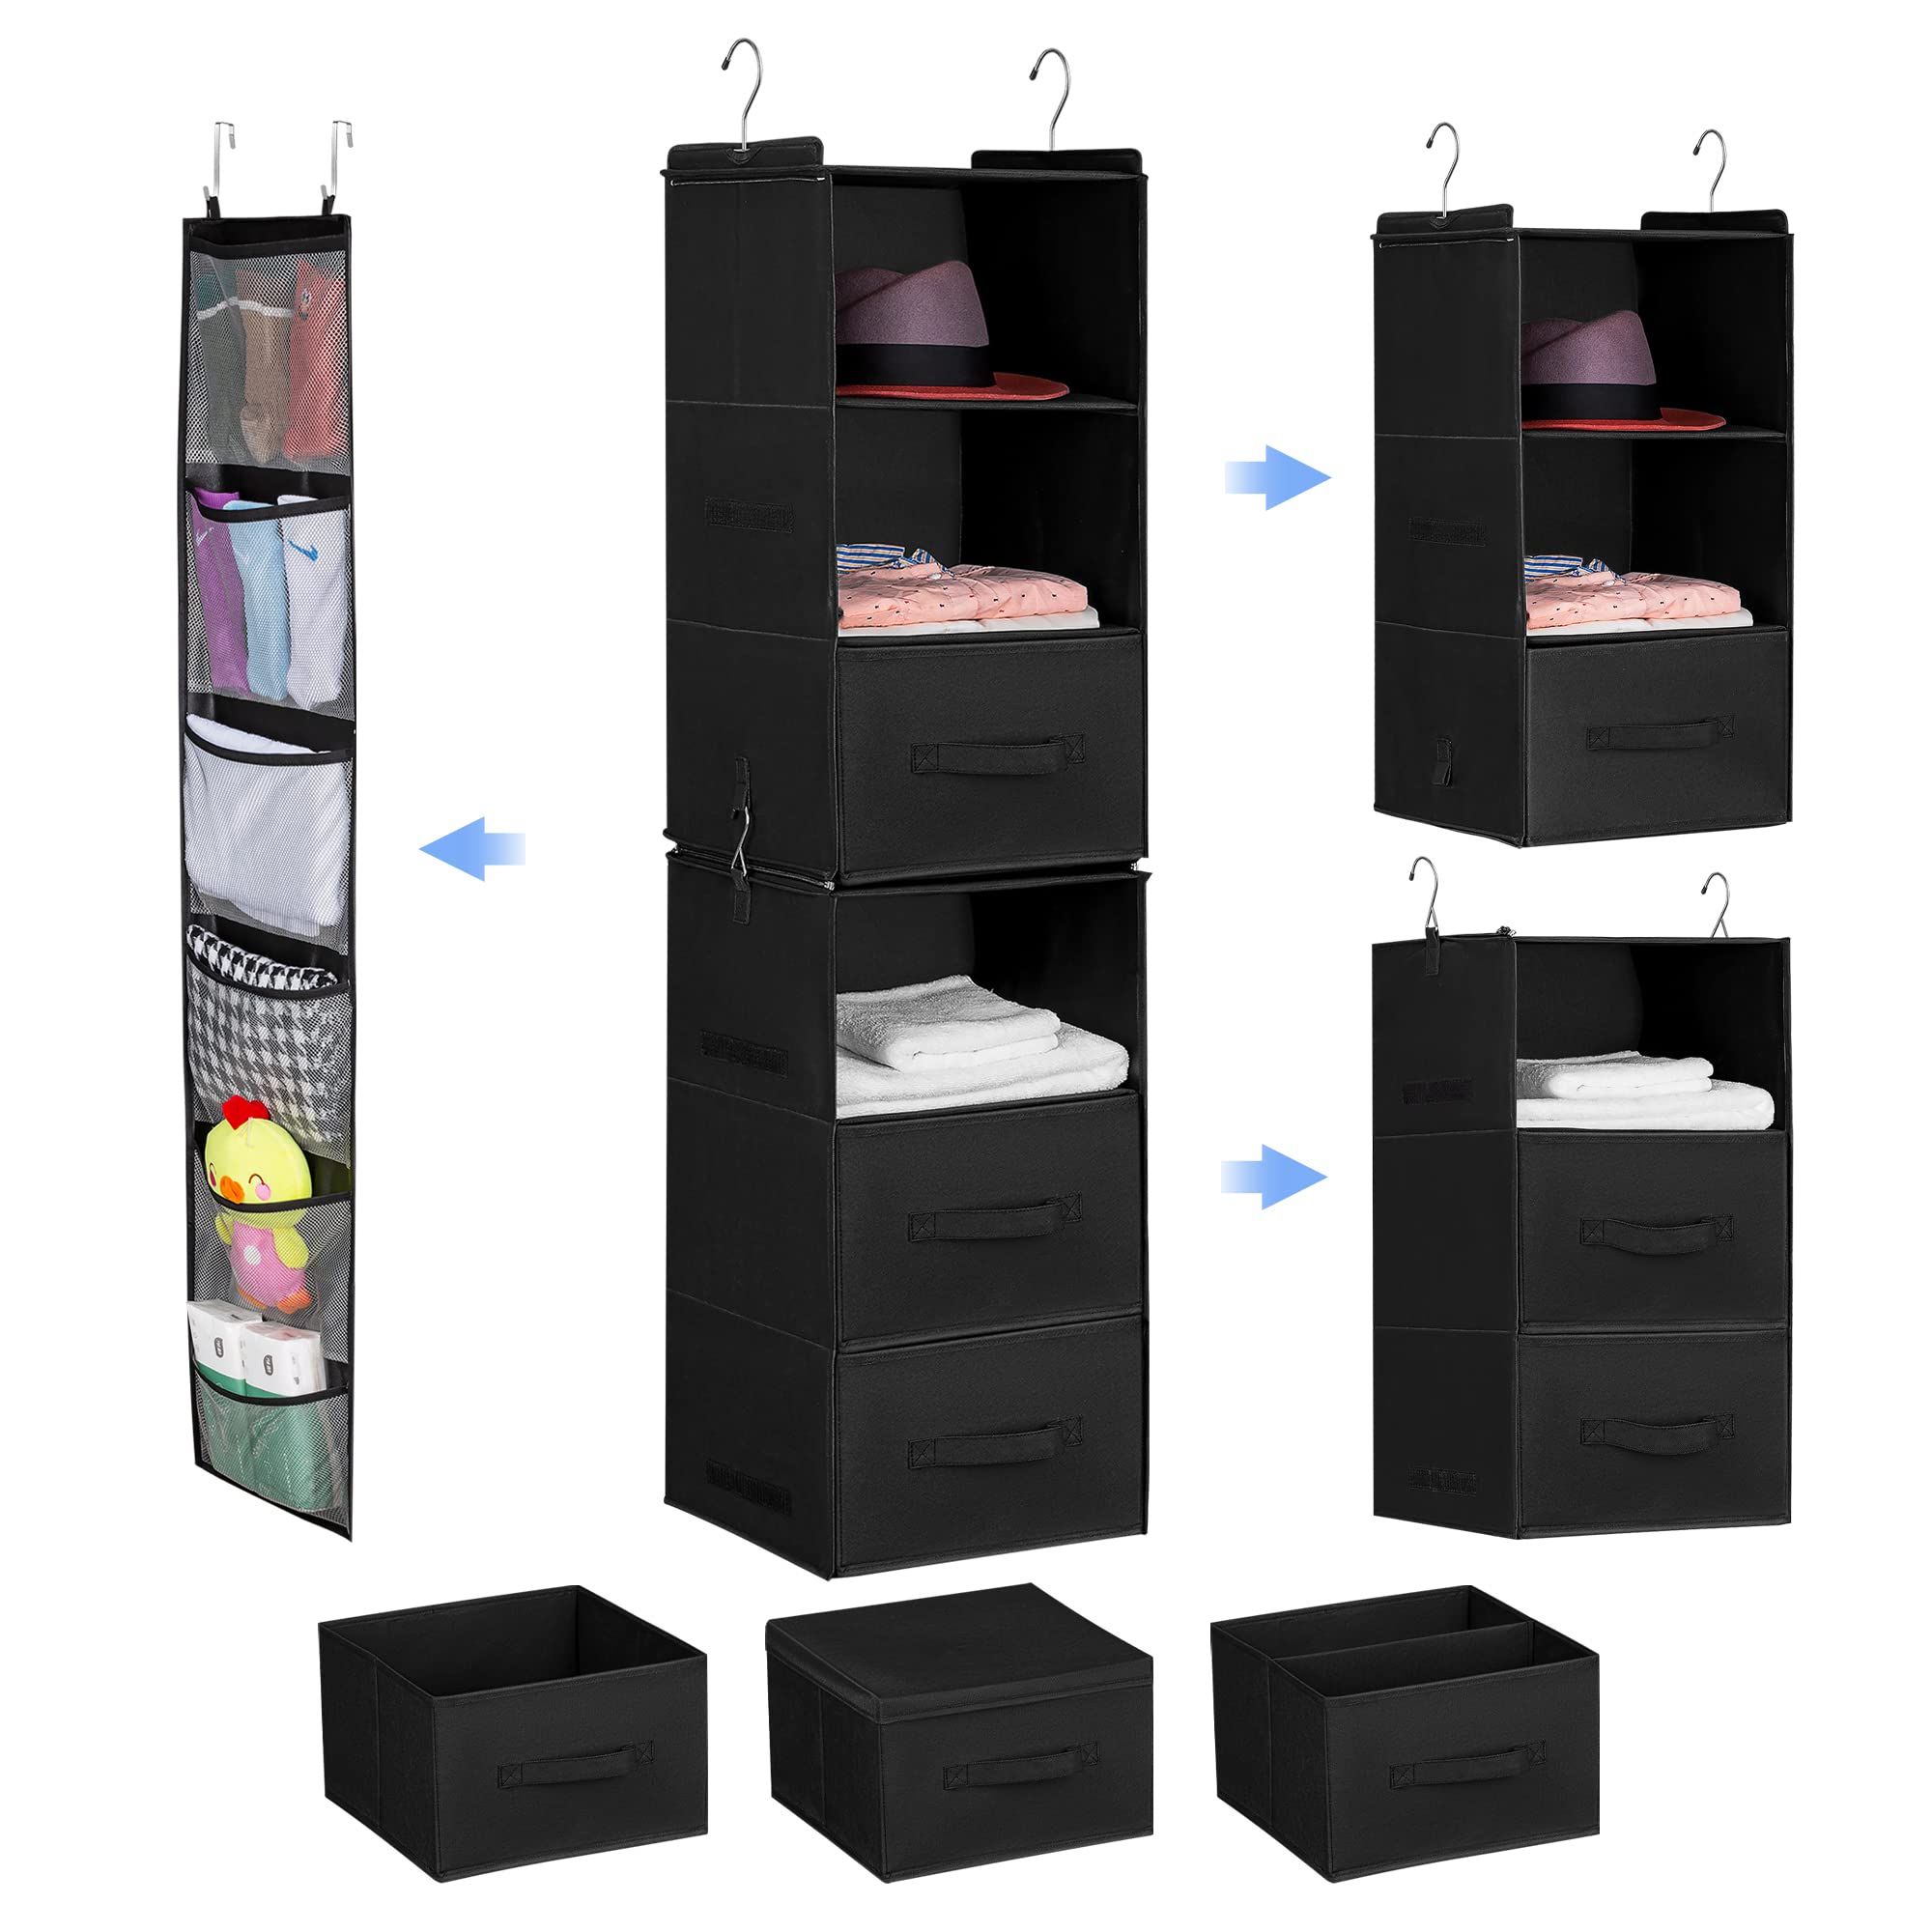 Most Current 2 Separable Wardrobes In Amazon: Elviros 6 Shelf Hanging Closet Organizer With 3 Drawers, 2  Separable 3 Shelf Hanging Shelves, Foldable Closet Organizers And Storage  For Bedroom Wardrobe Nursery Clothes Rack(black) : Home & Kitchen (View 6 of 10)